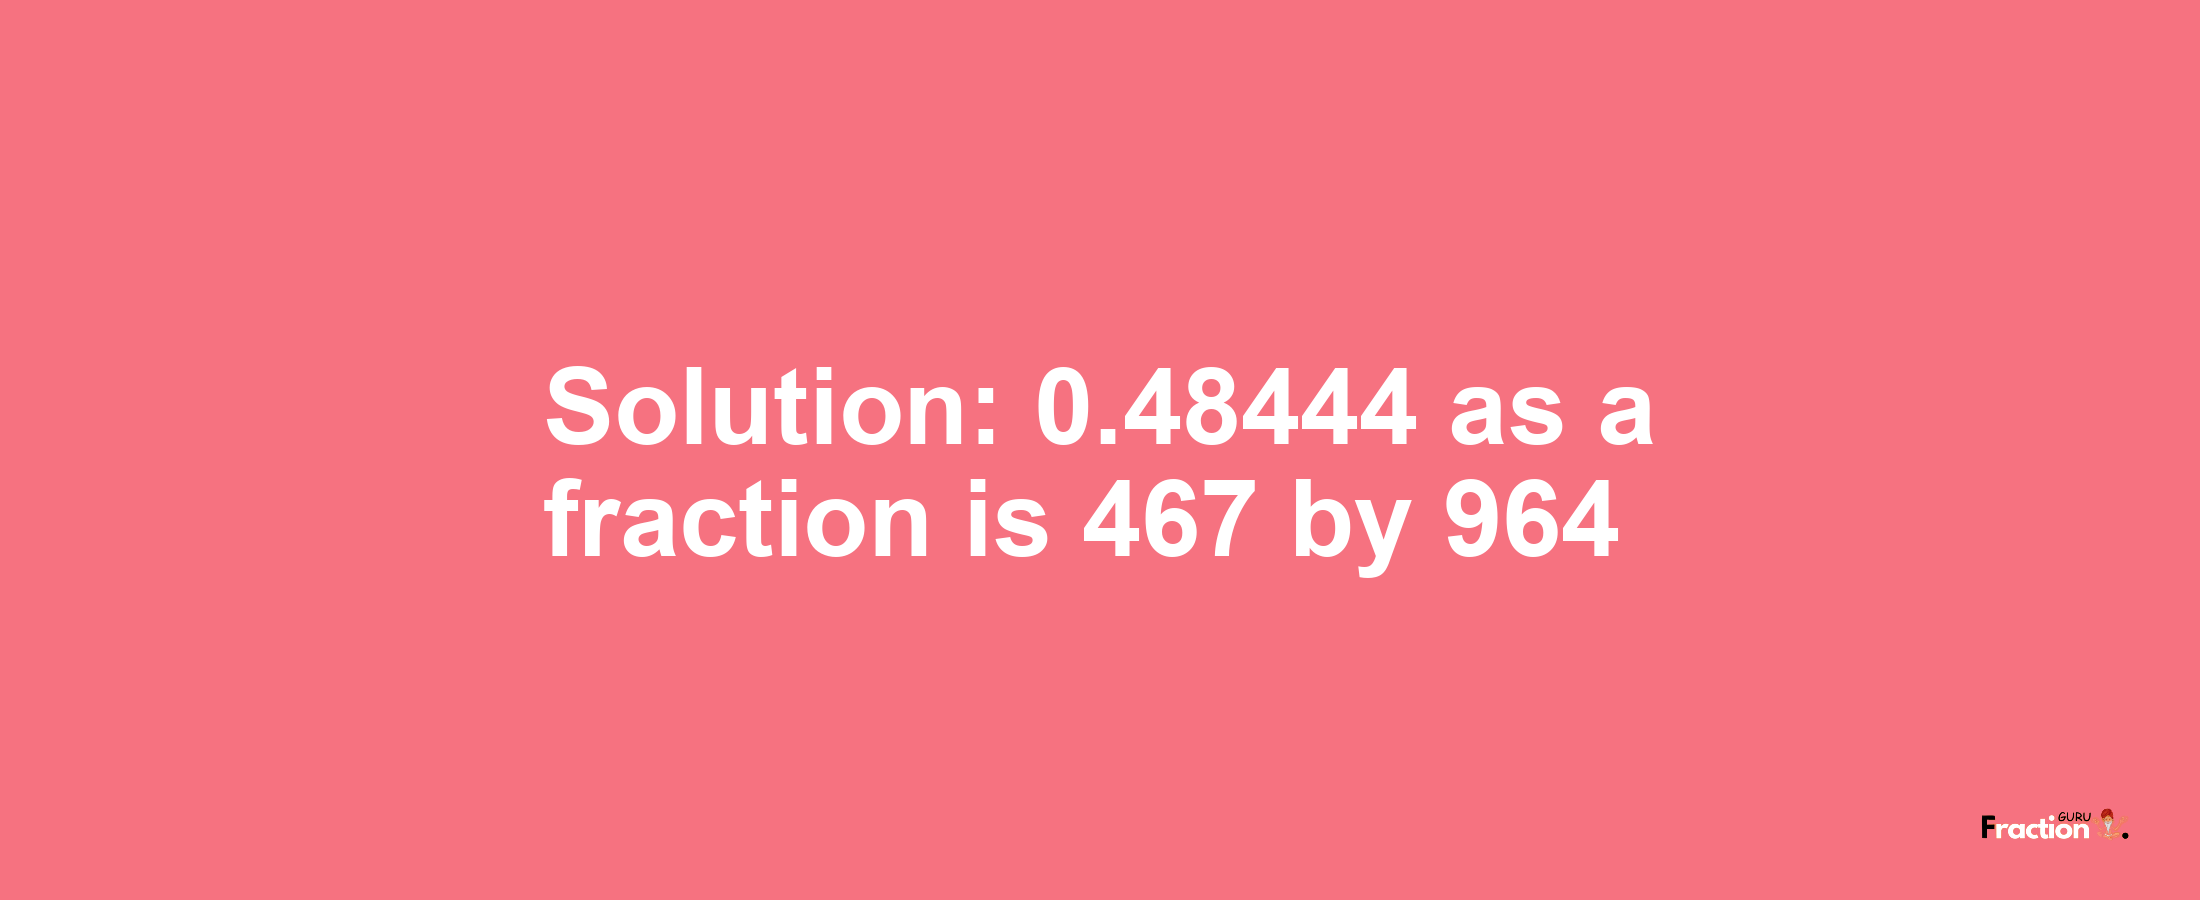 Solution:0.48444 as a fraction is 467/964